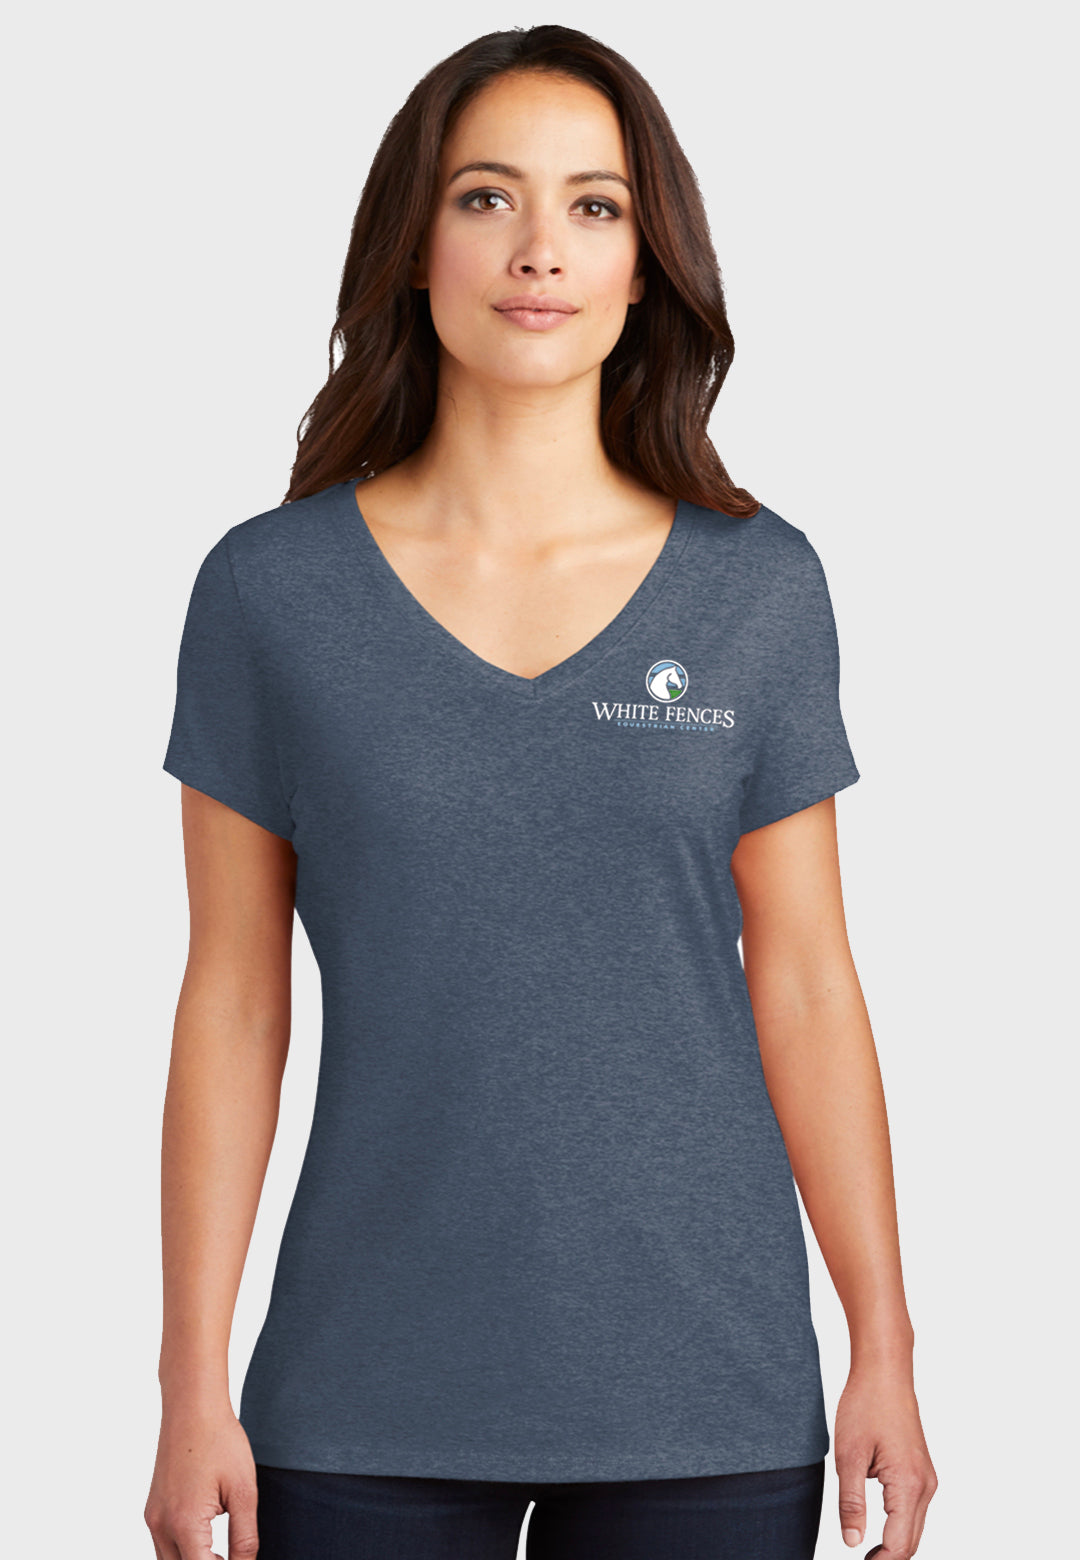 White Fences Equestrian Center District ® ladies Perfect Tri ® V-Neck Tee - Multiple color options